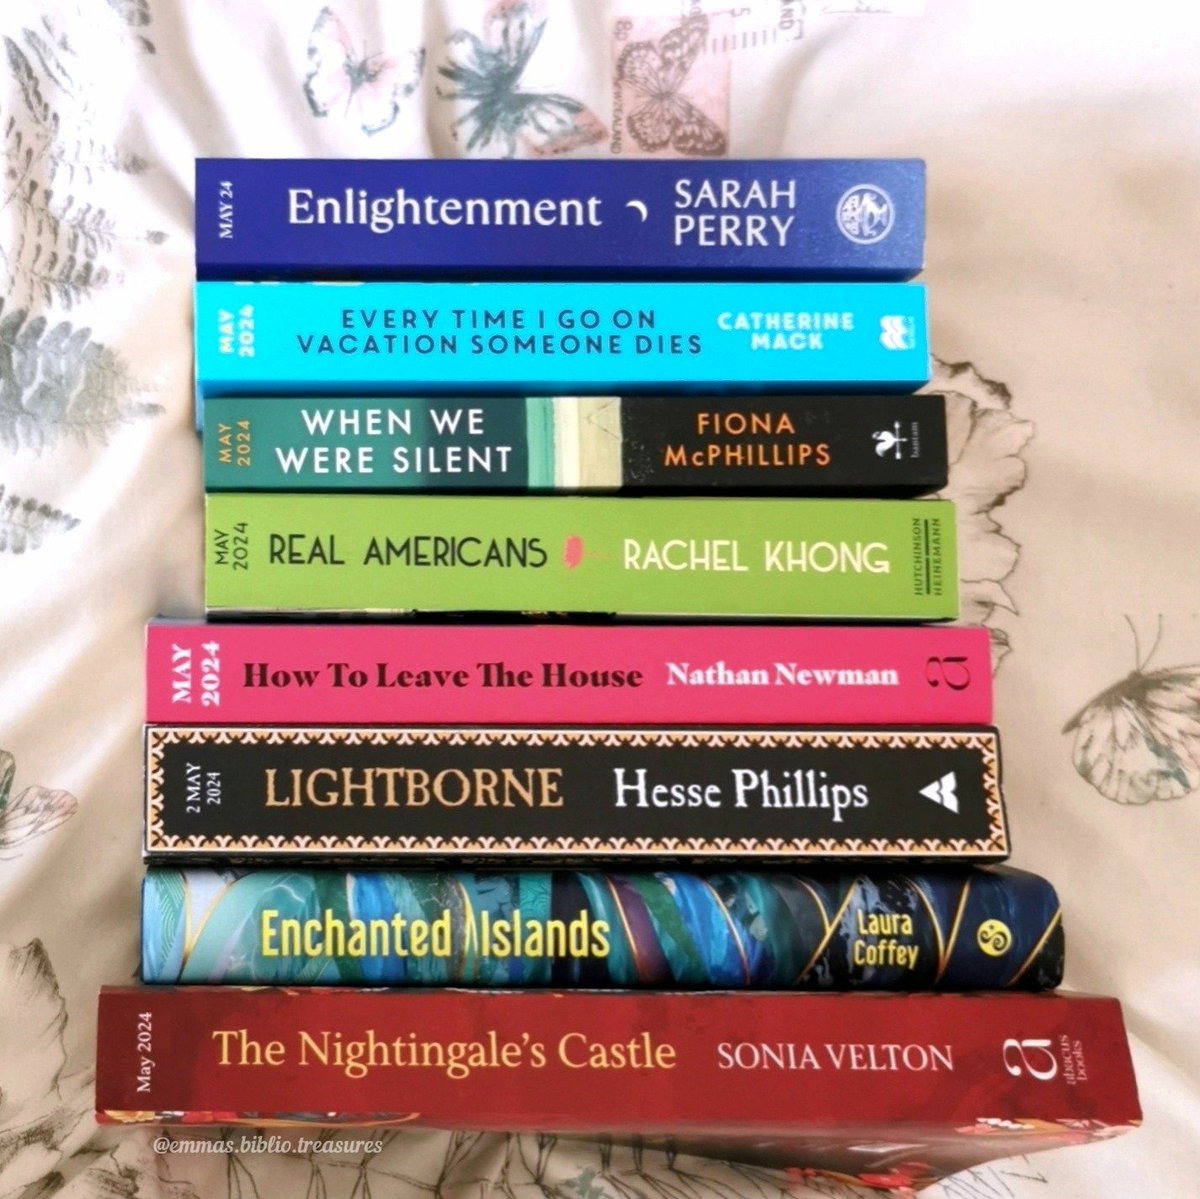 It's the first May #PublicationDay and there's some great books out today. Are any of these on your TBR? @Laura__Coffey @Summersdale @panmacmillan #BookTwitter #booktwt #EmmasAnticipatedTreasures